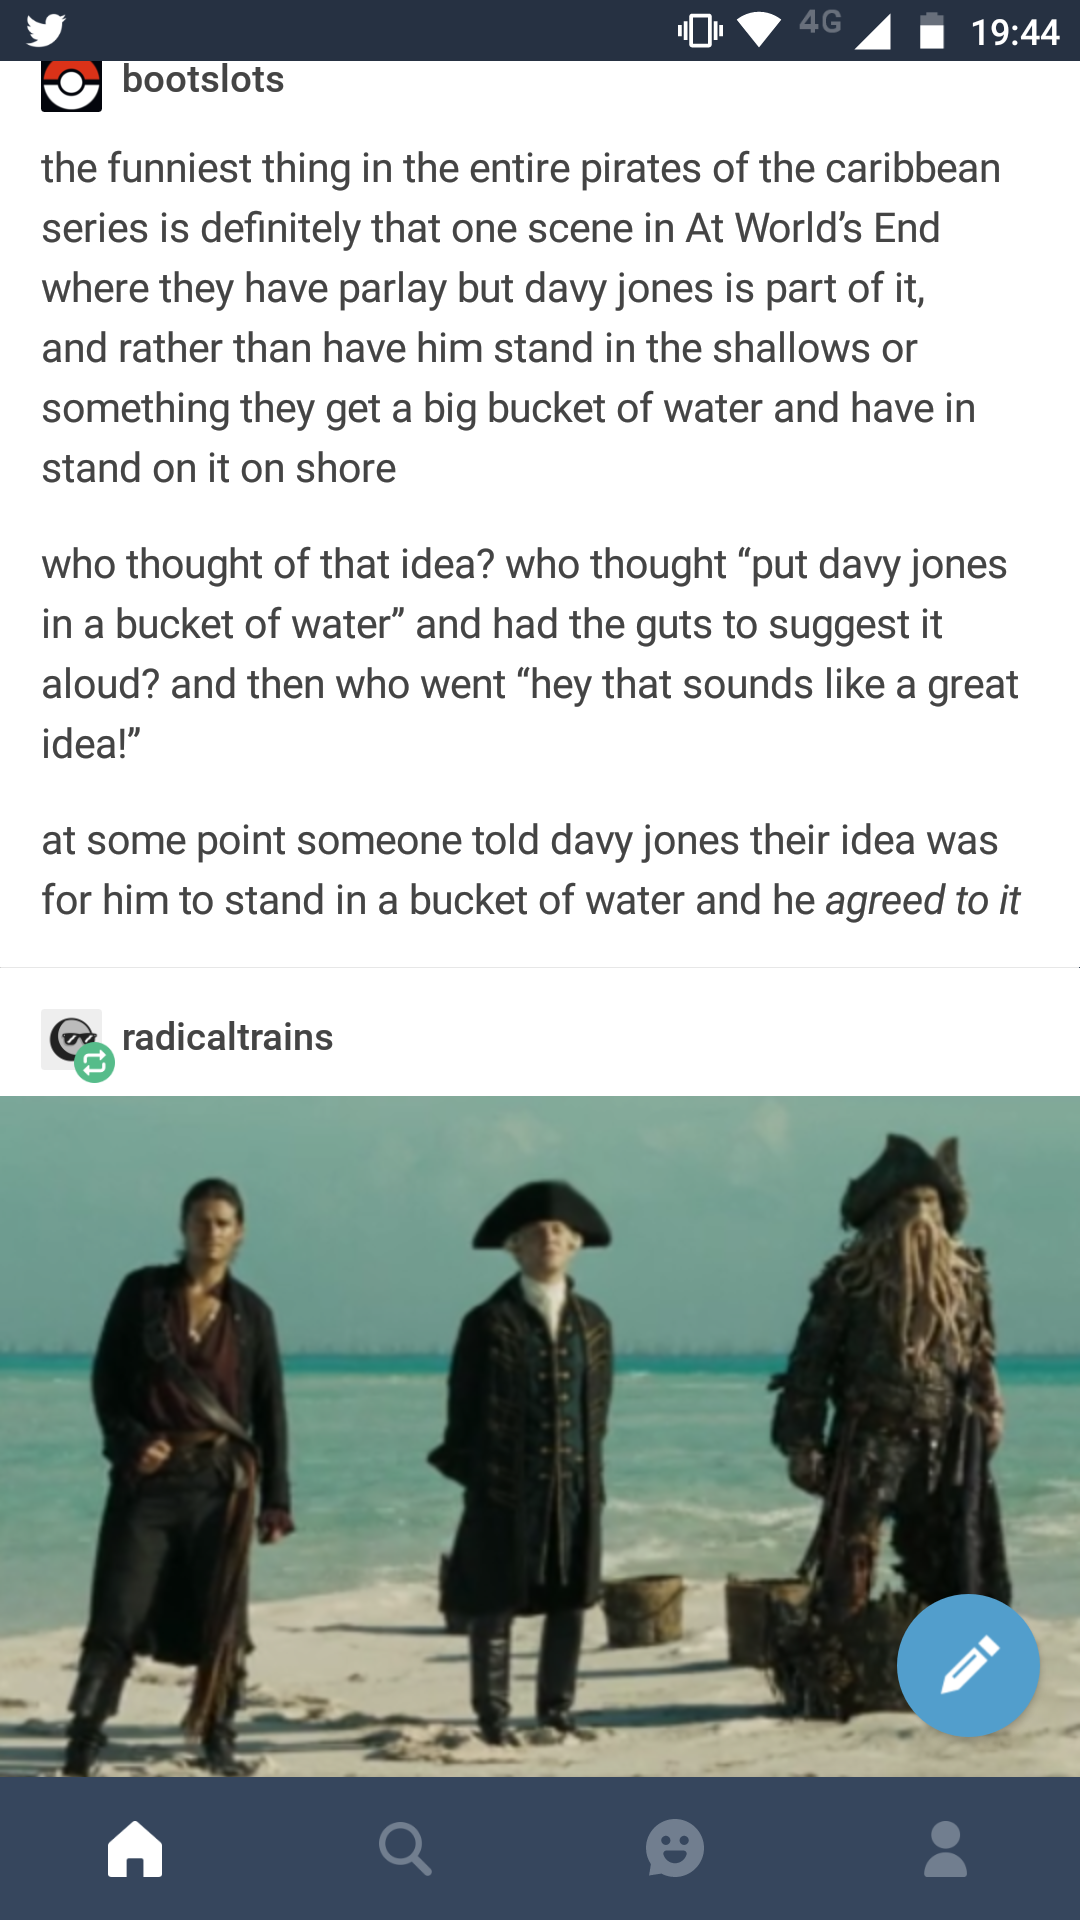 davy jones bucket - 0 4 bootslots the funniest thing in the entire pirates of the caribbean series is definitely that one scene in At World's End where they have parlay but davy jones is part of it, and rather than have him stand in the shallows or someth